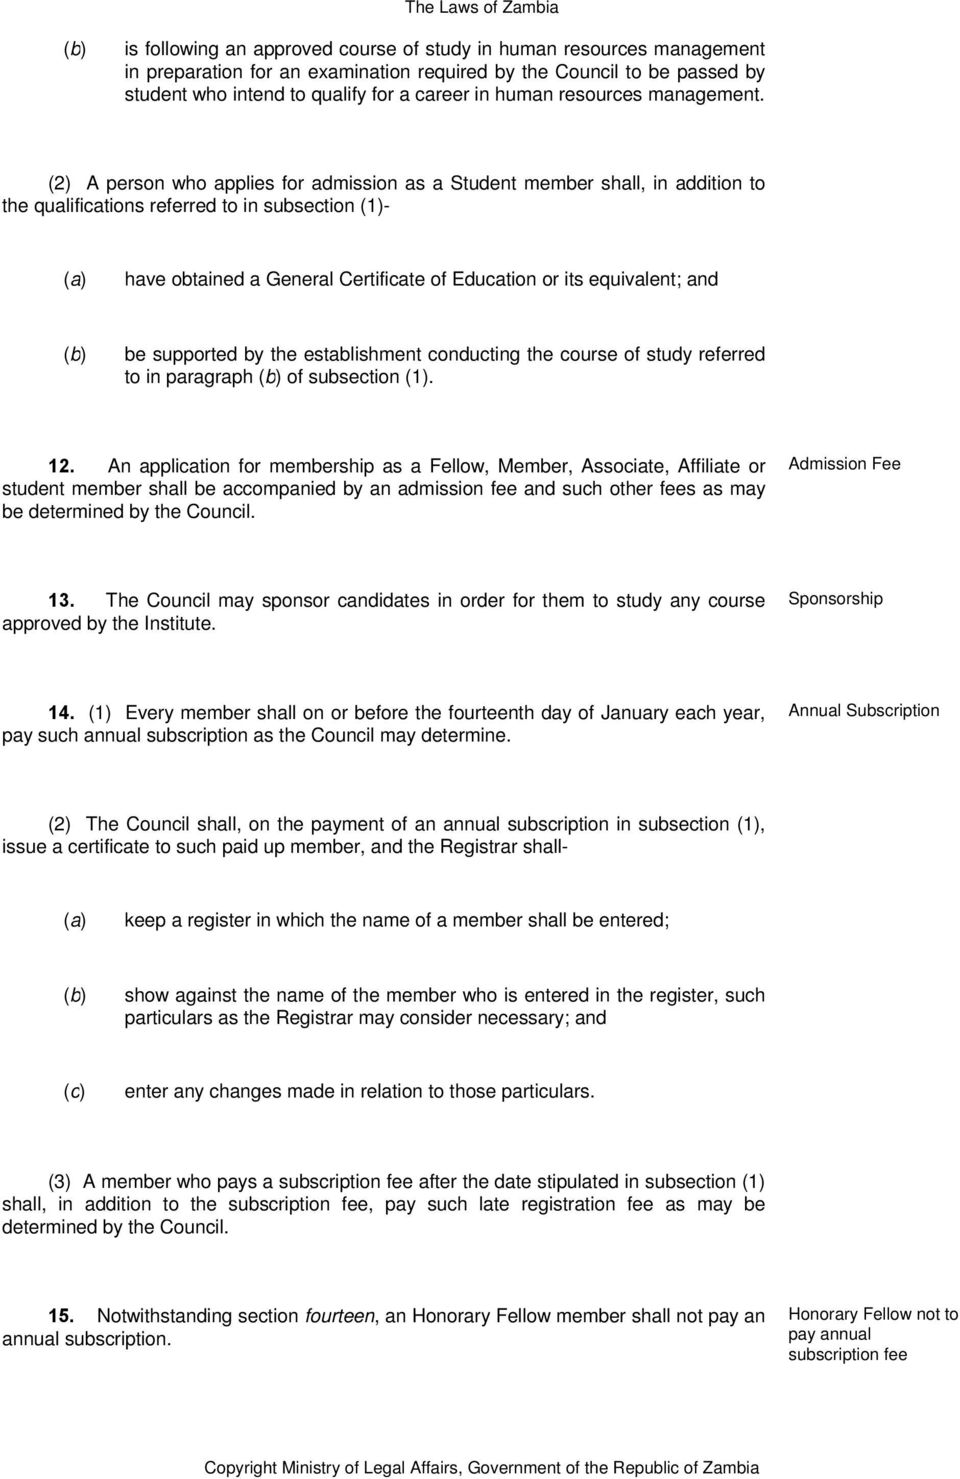 (2) A person who applies for admission as a Student member shall, in addition to the qualifications referred to in subsection (1)- have obtained a General Certificate of Education or its equivalent;